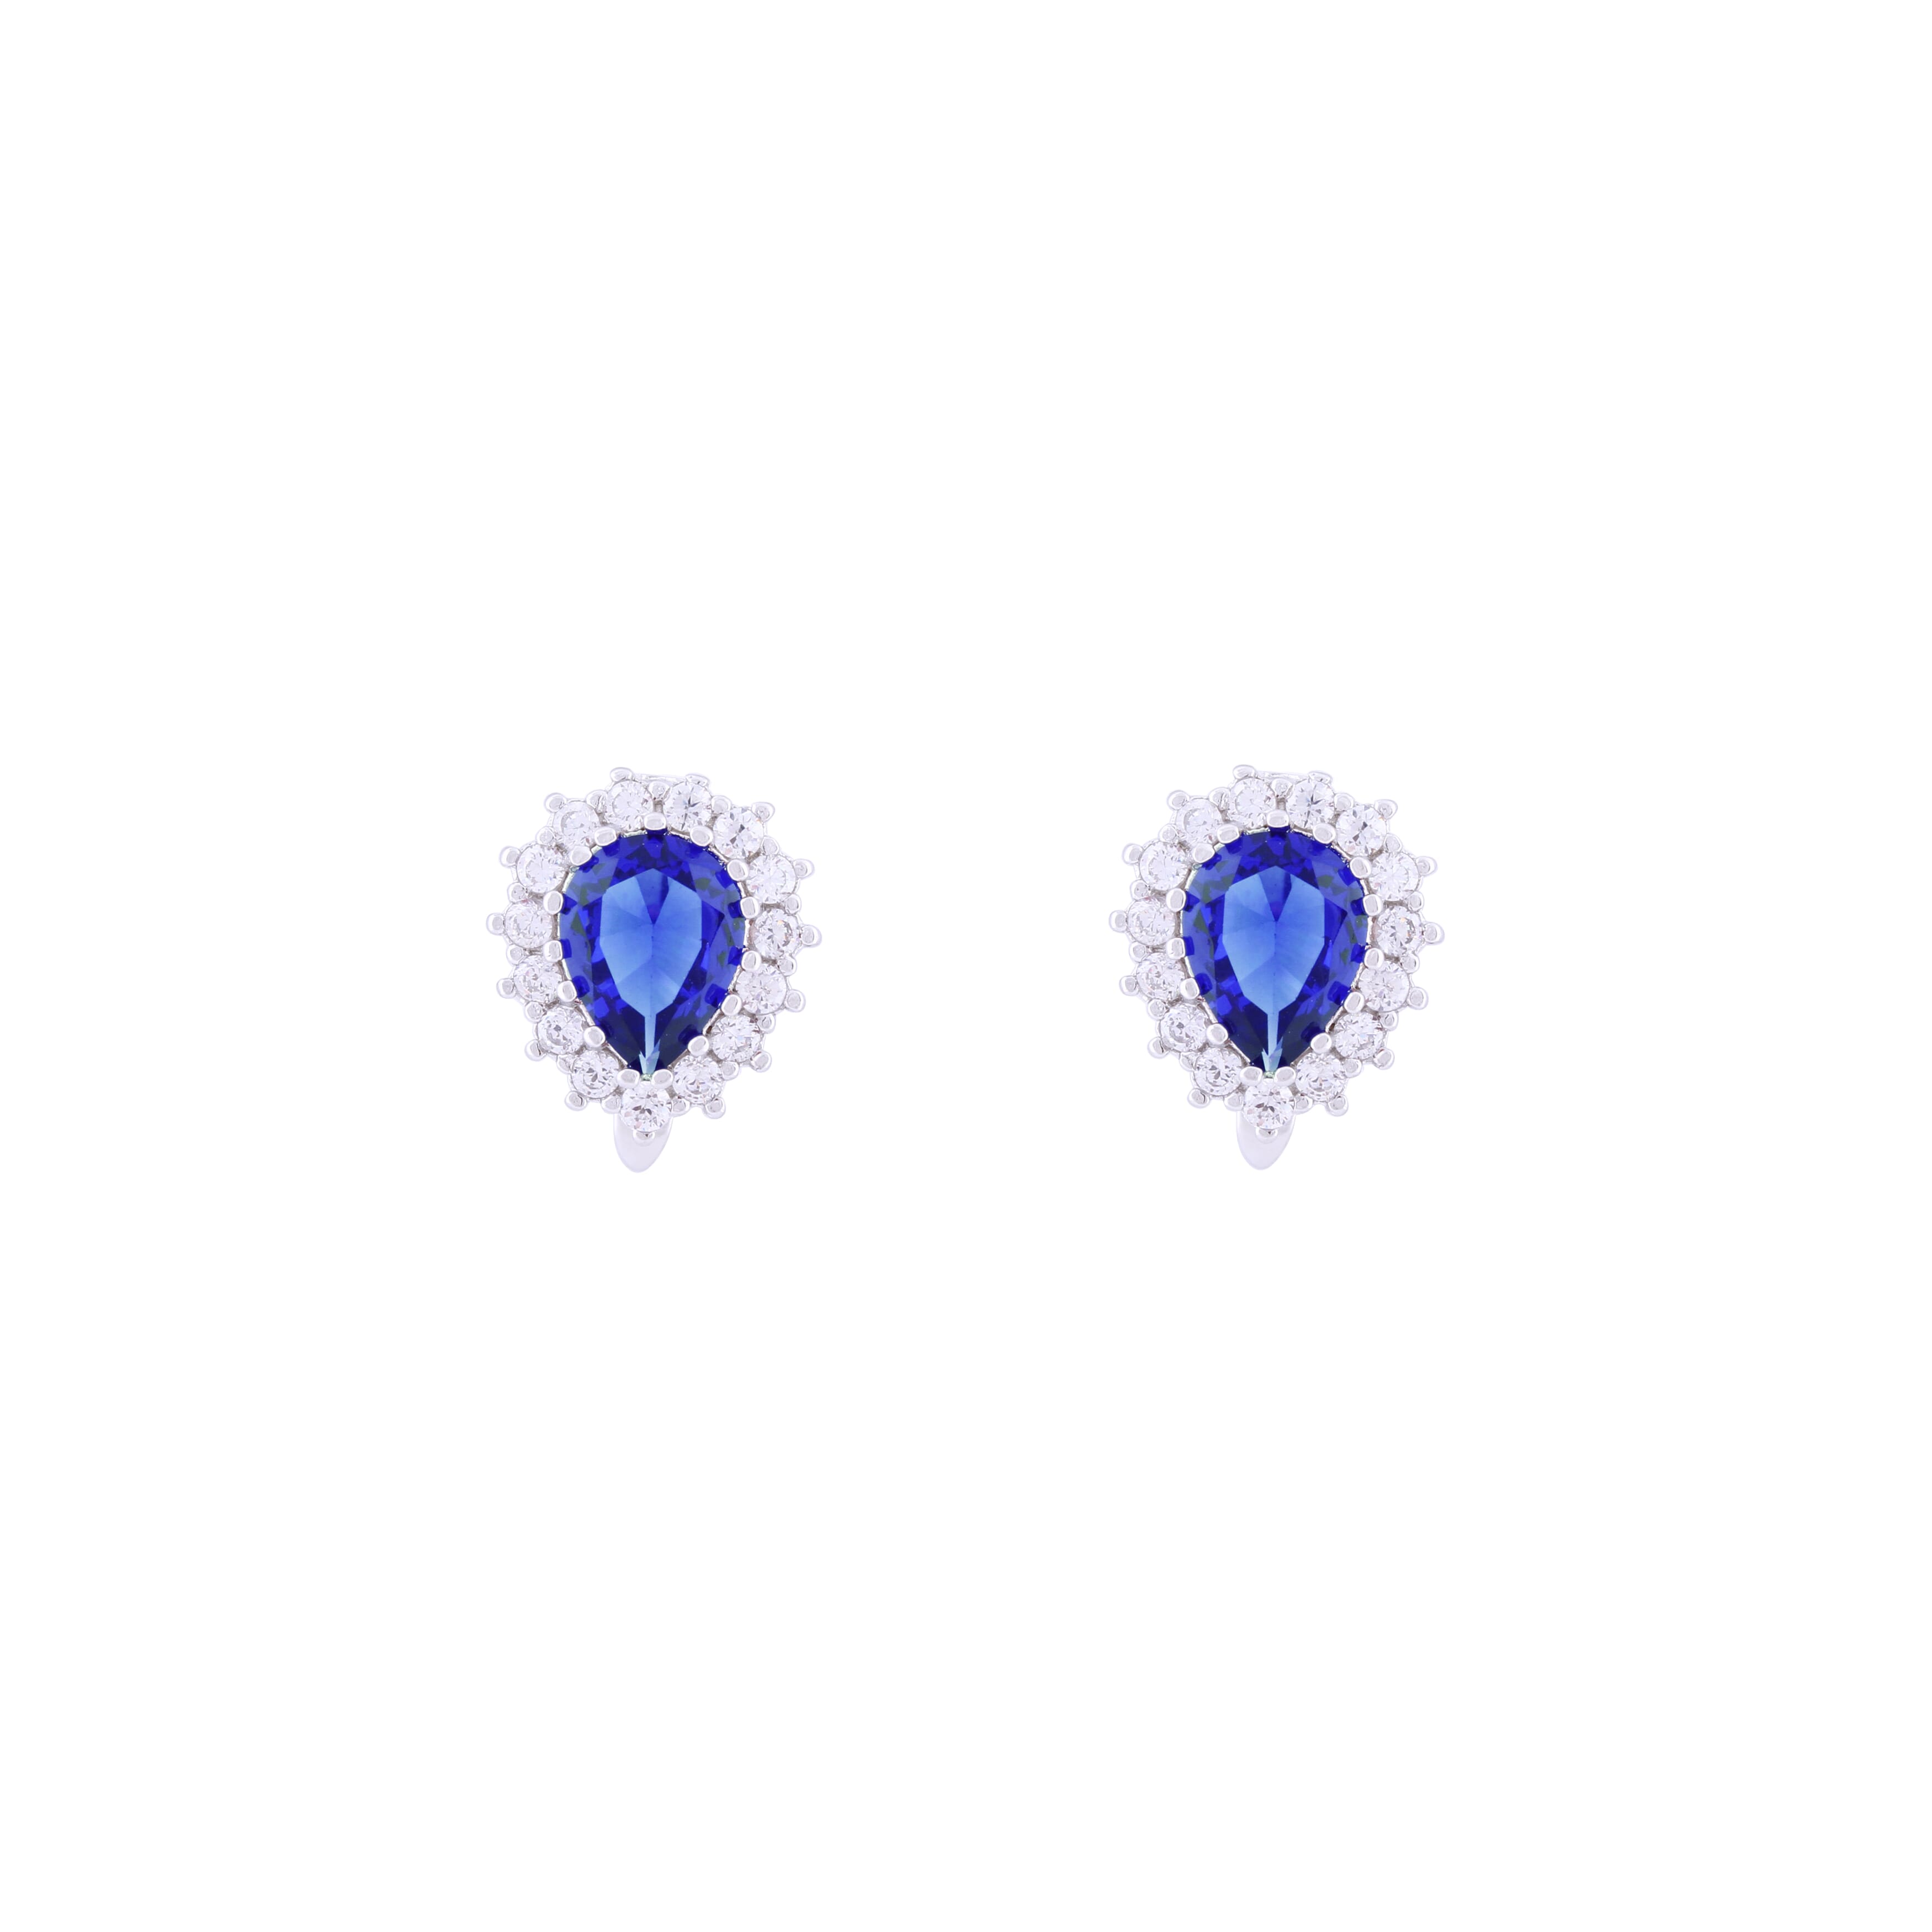 Asfour Crystal 925 Sterling Silver Clips Earrings with Blue Pear Design